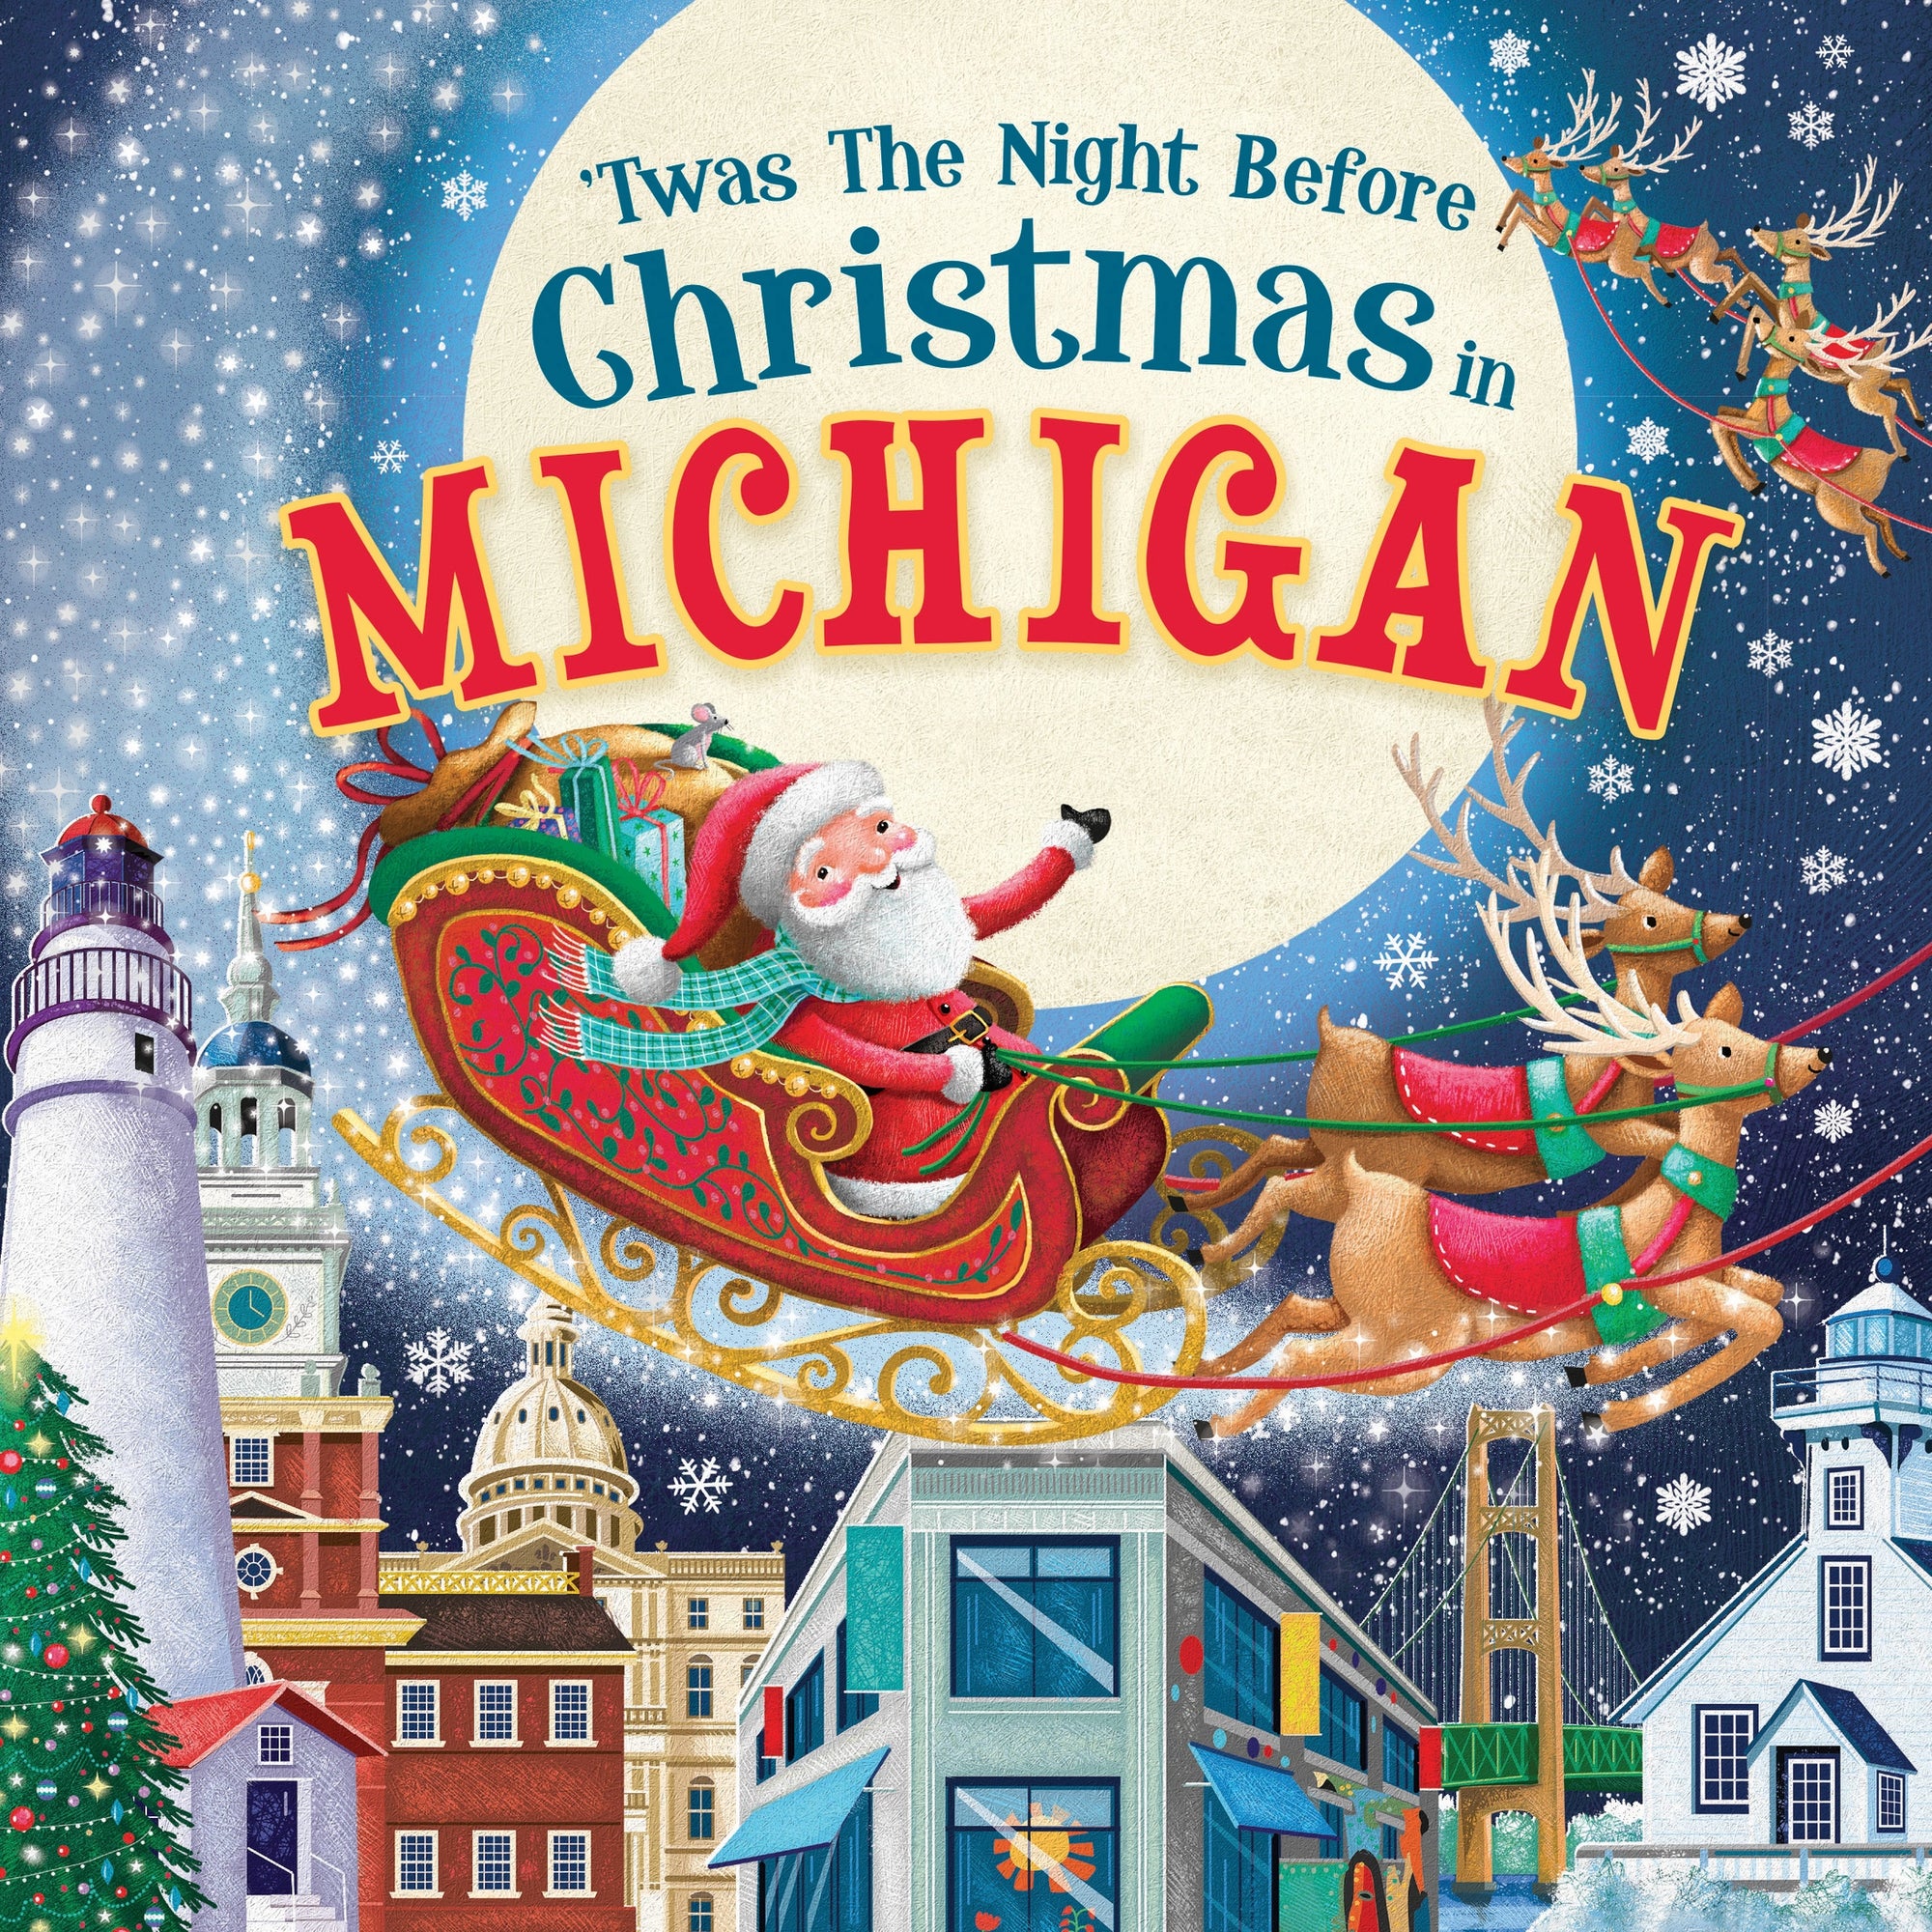 Twas the Night Before Christmas in Michigan